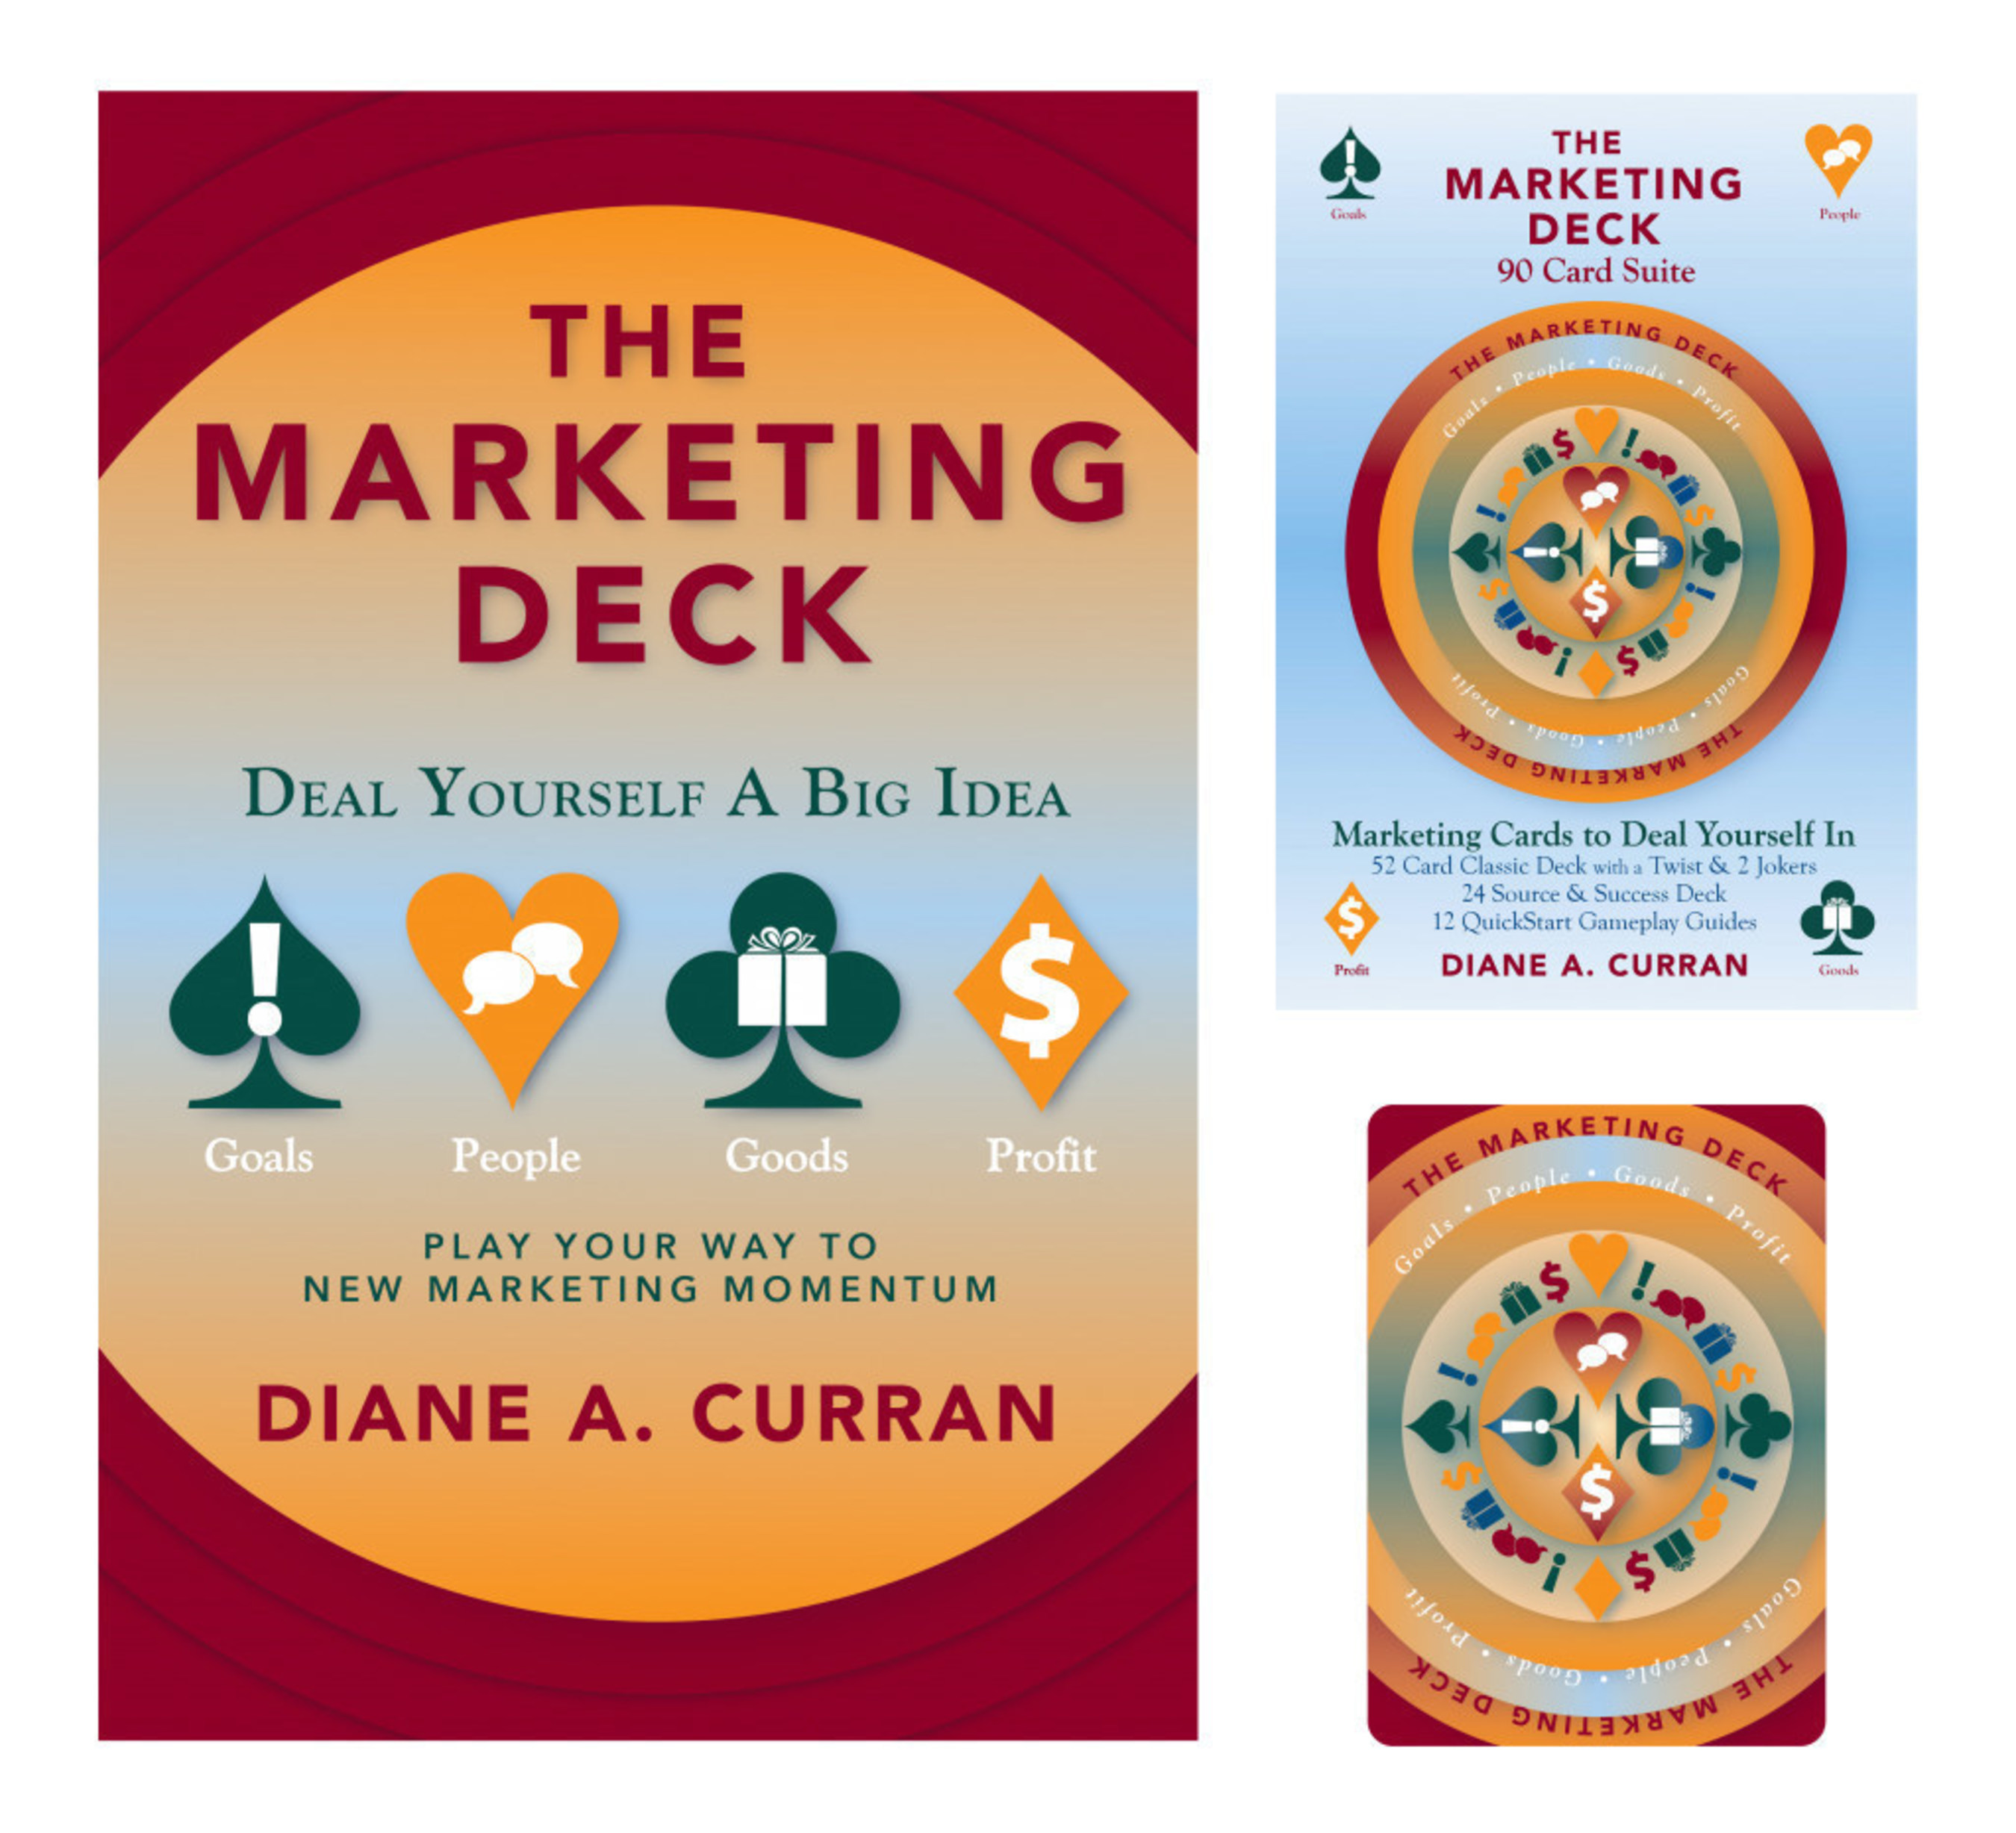 The Marketing Deck Suite Book and Cards